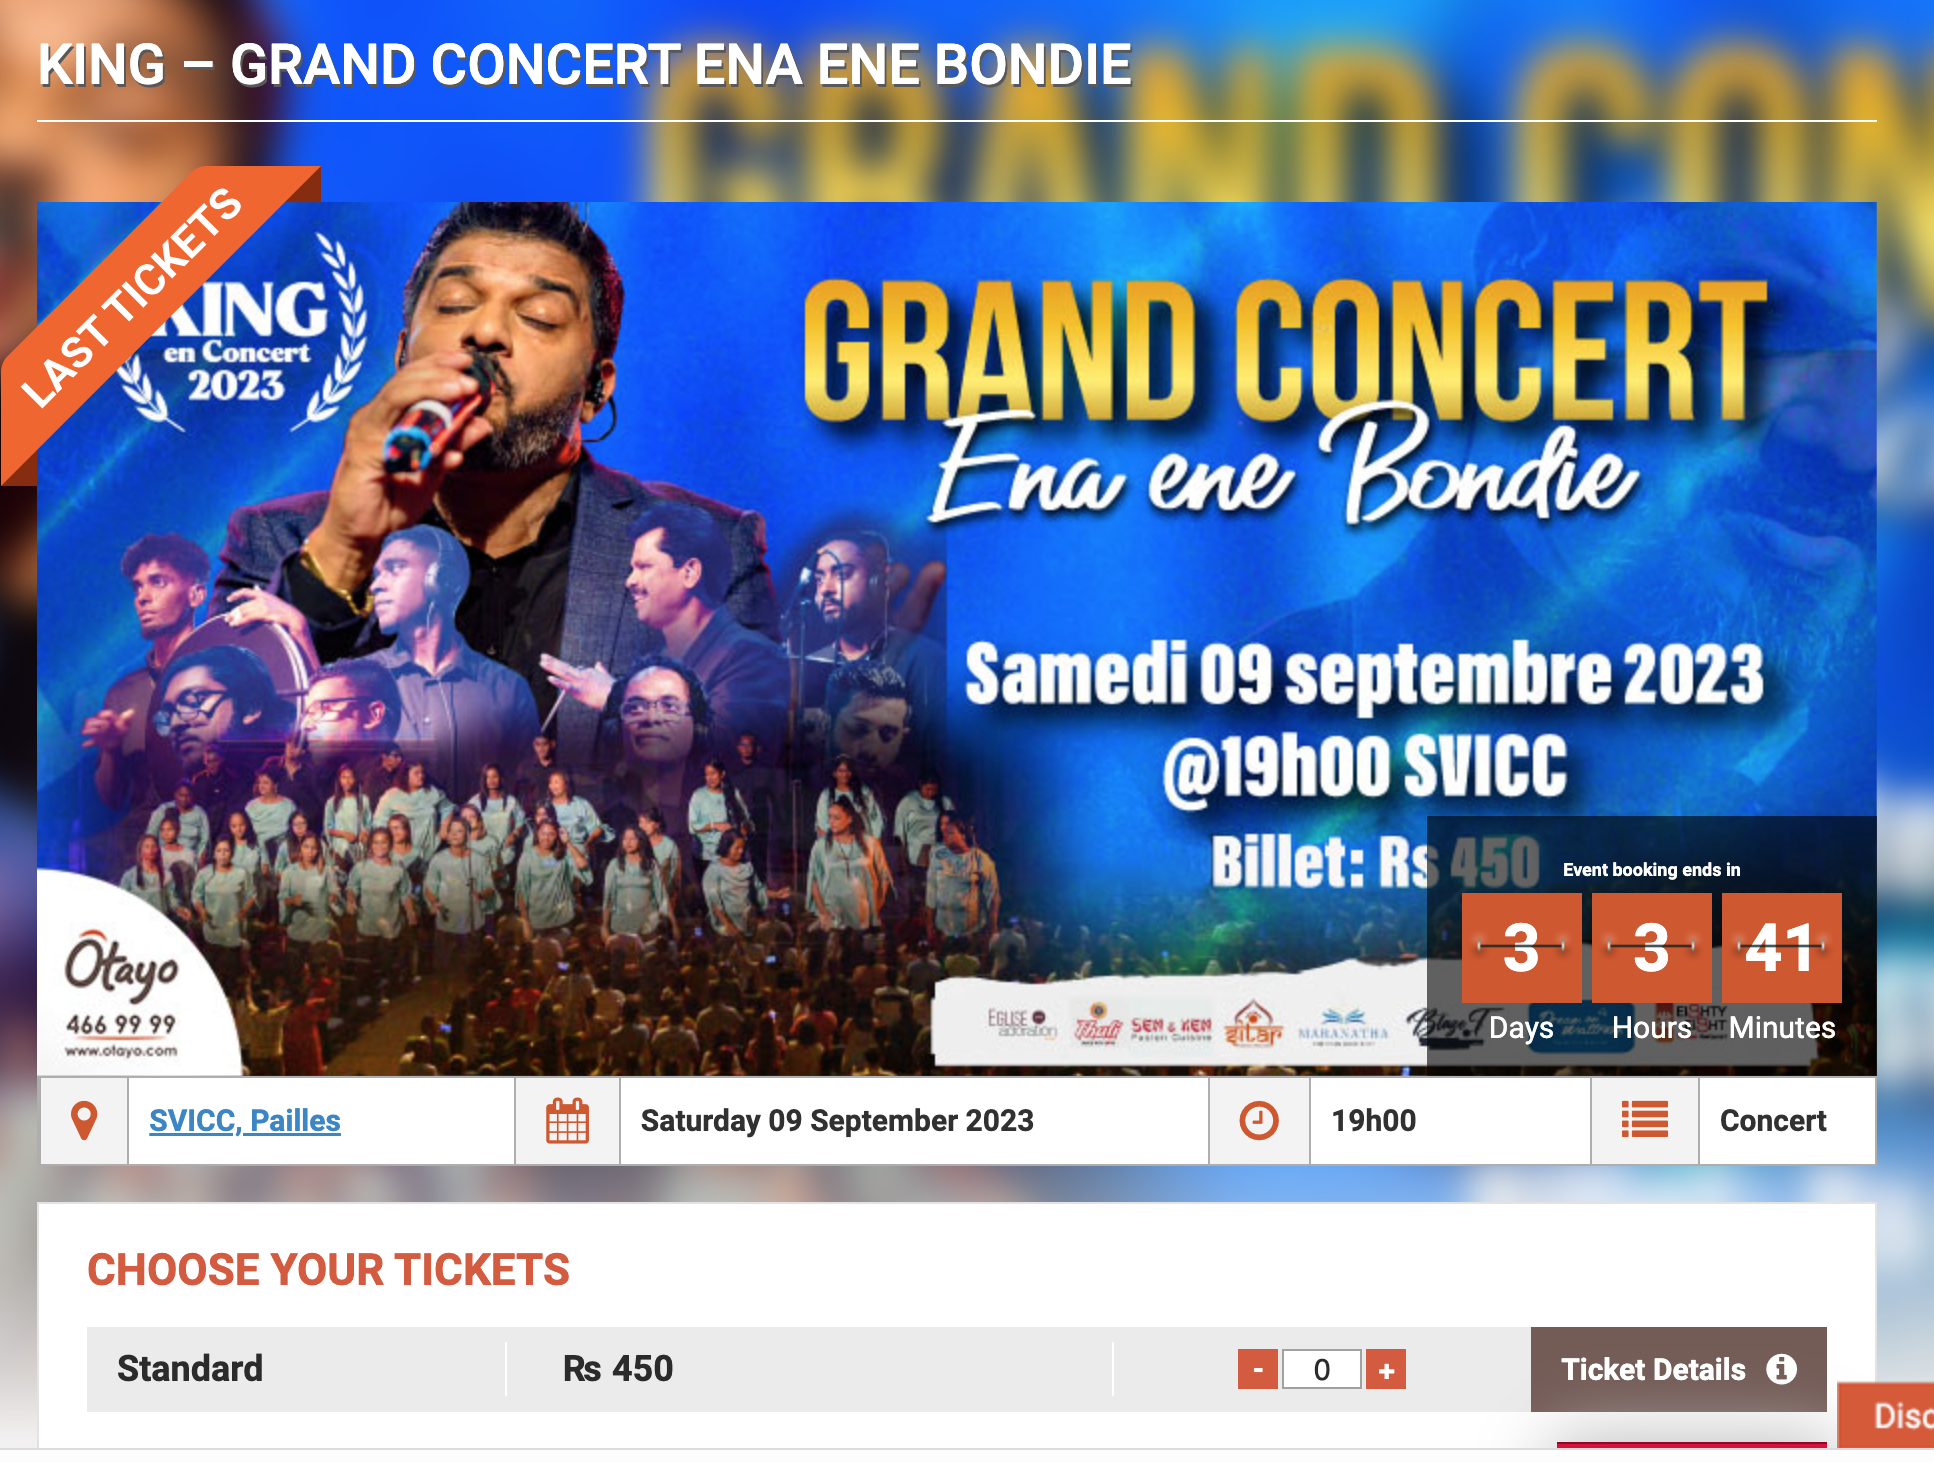 Weekend Events in Beautiful Mauritius- Grand Concert à l'Ile Maurice-KING - GRAND CONCERT ENA ENE BONDIE